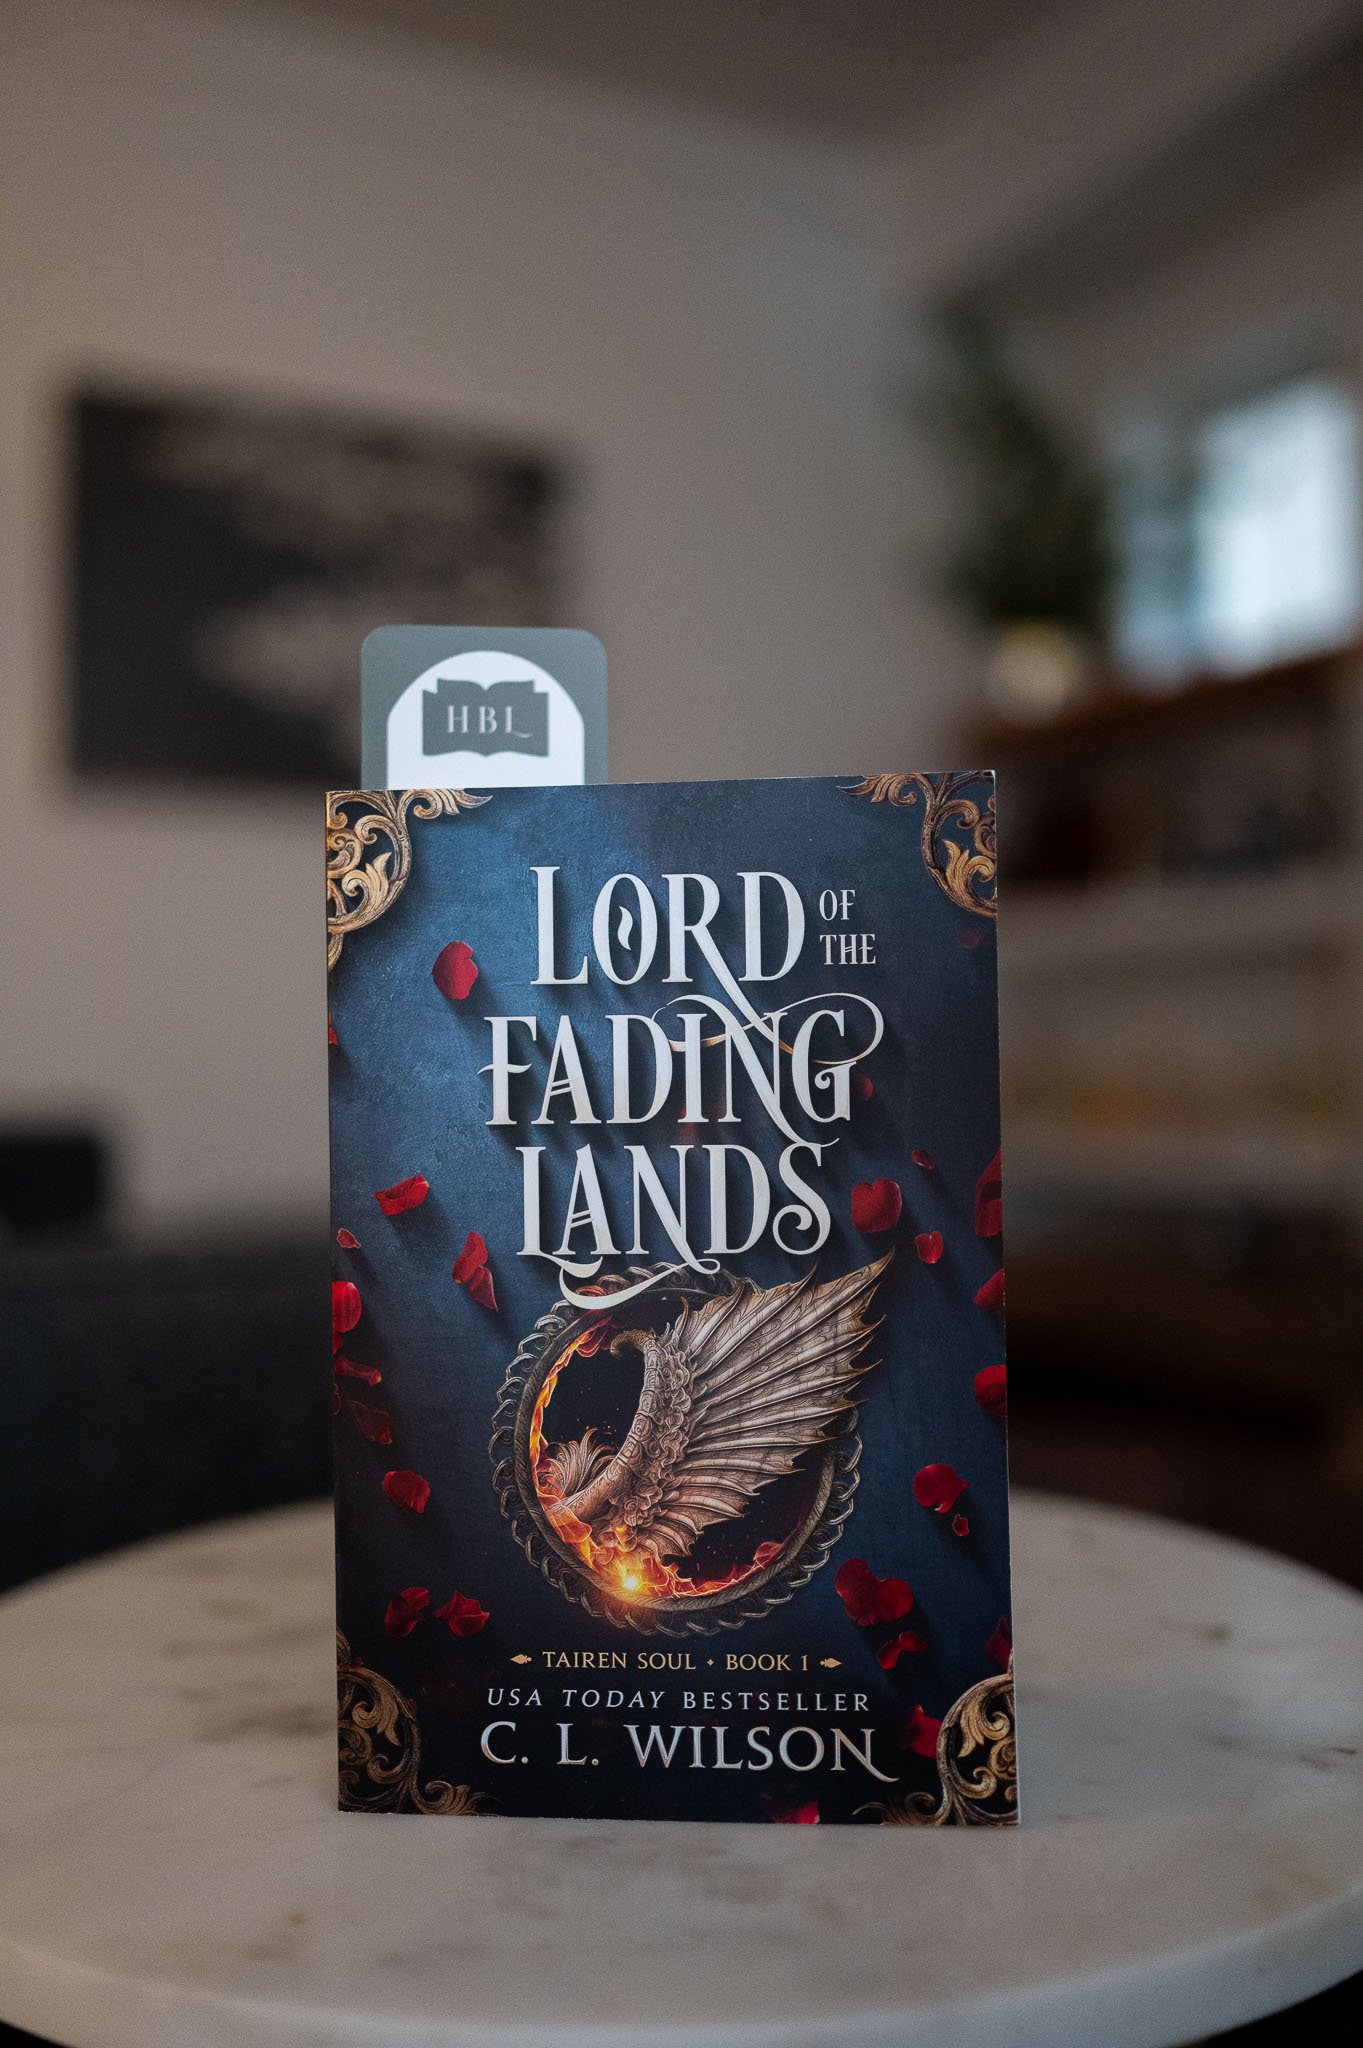 Lord of the Fading Lands by C. L. Wilson